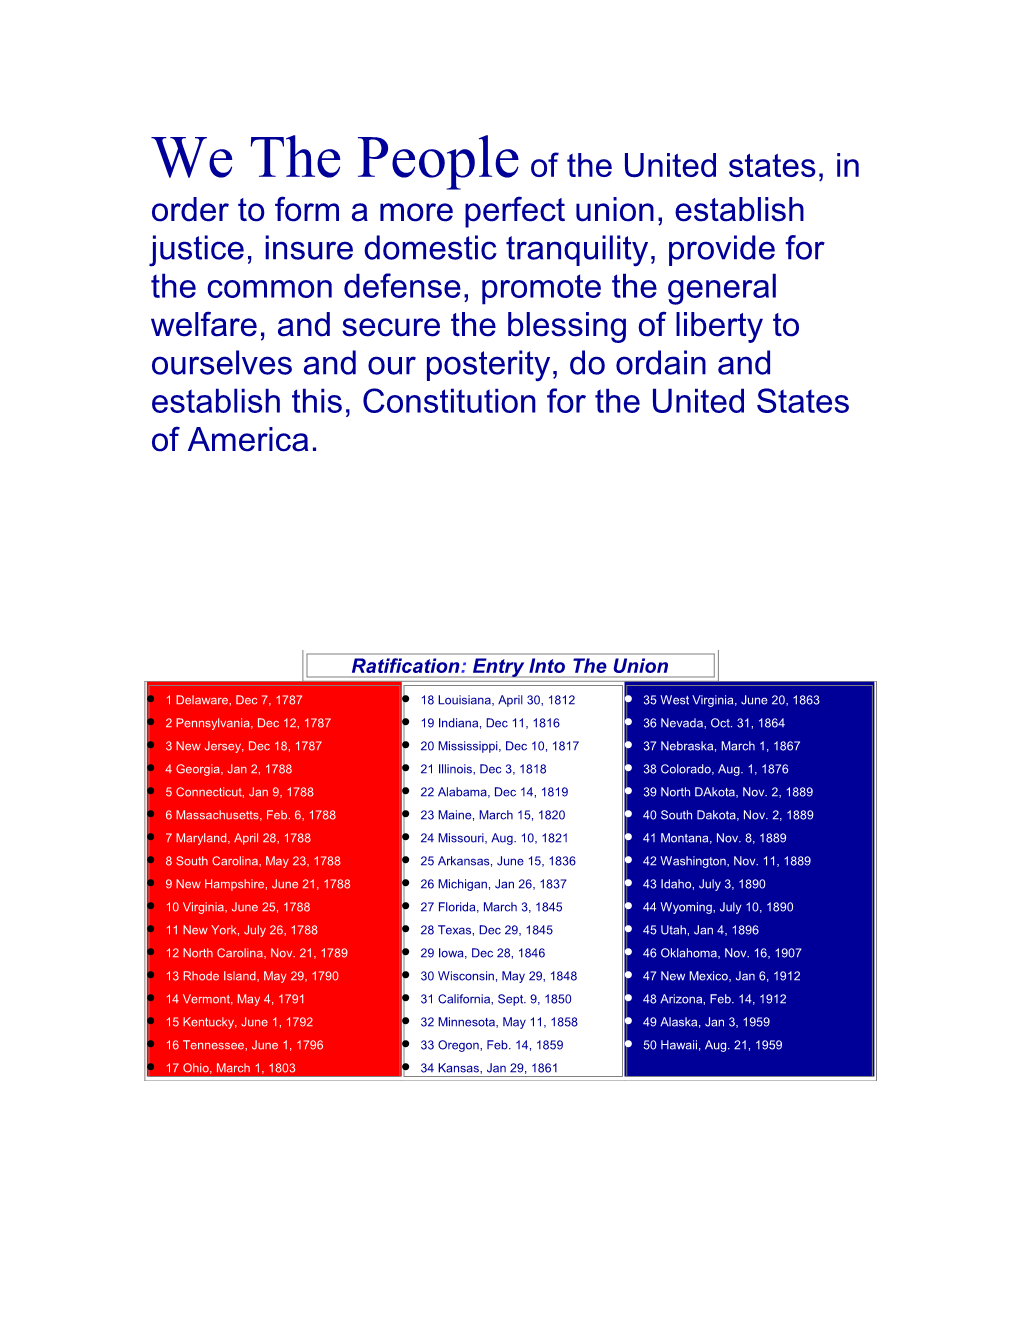 We the People of the United States, in Order to Form a More Perfect Union, Establish Justice